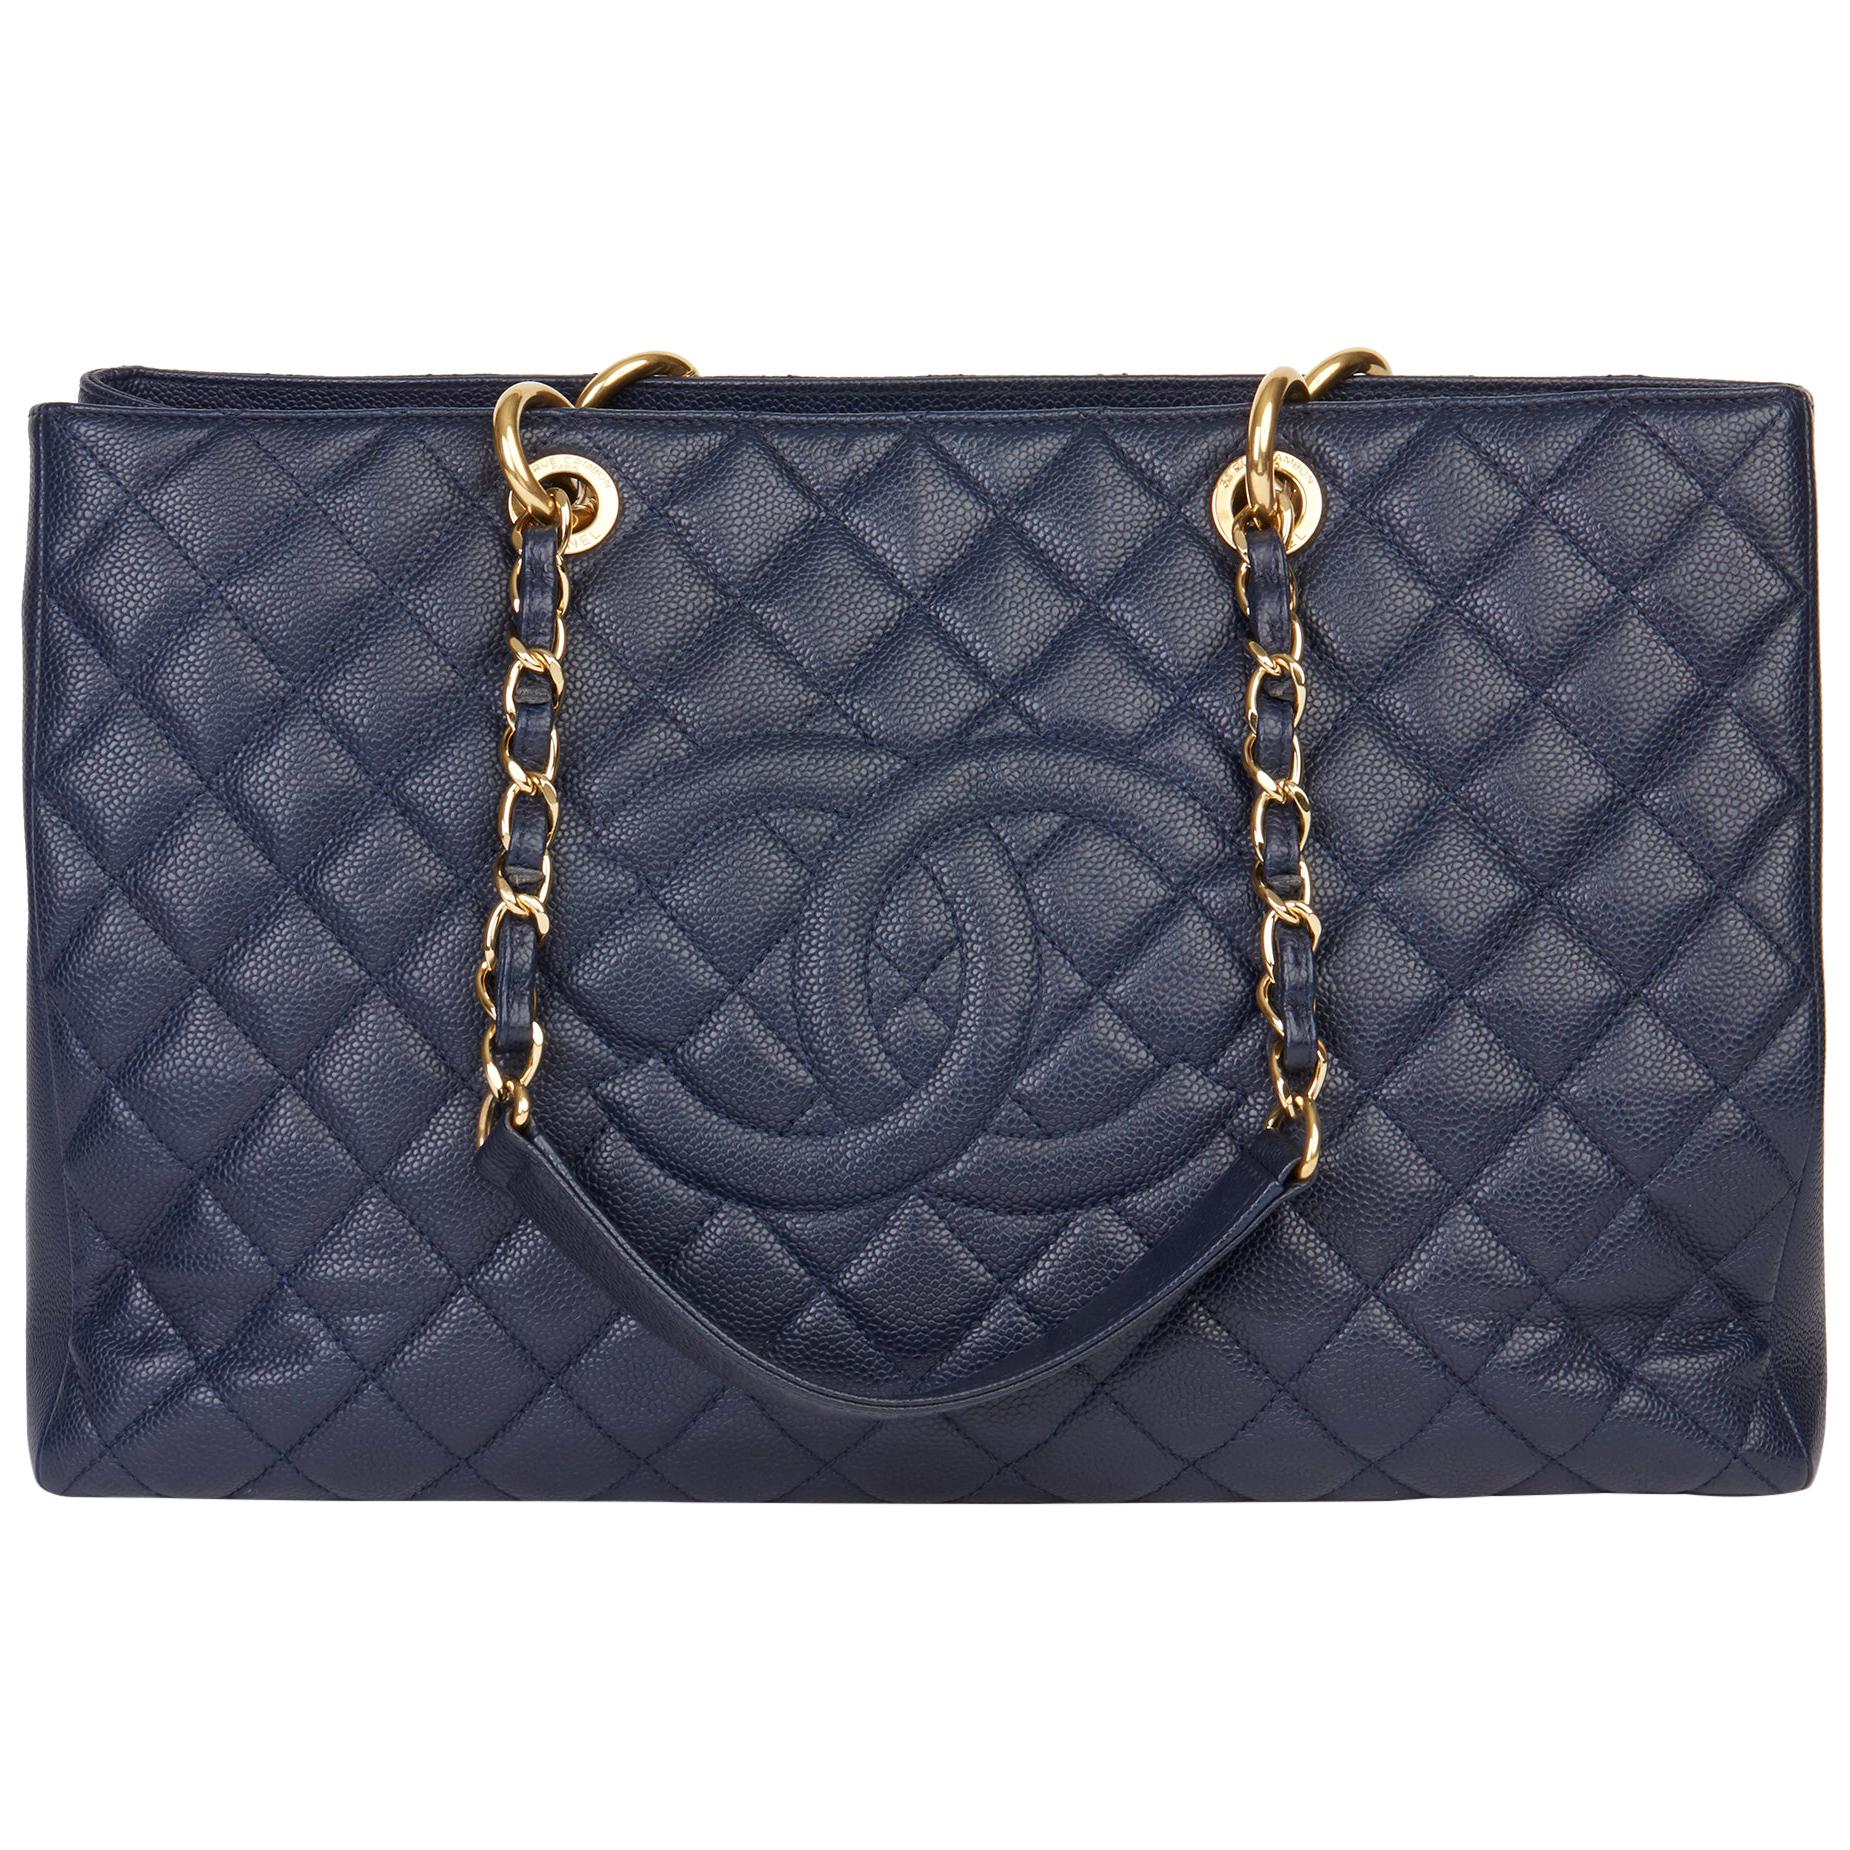 2014 Chanel Navy Quilted Caviar Leather Grand Shopping Tote XL GST